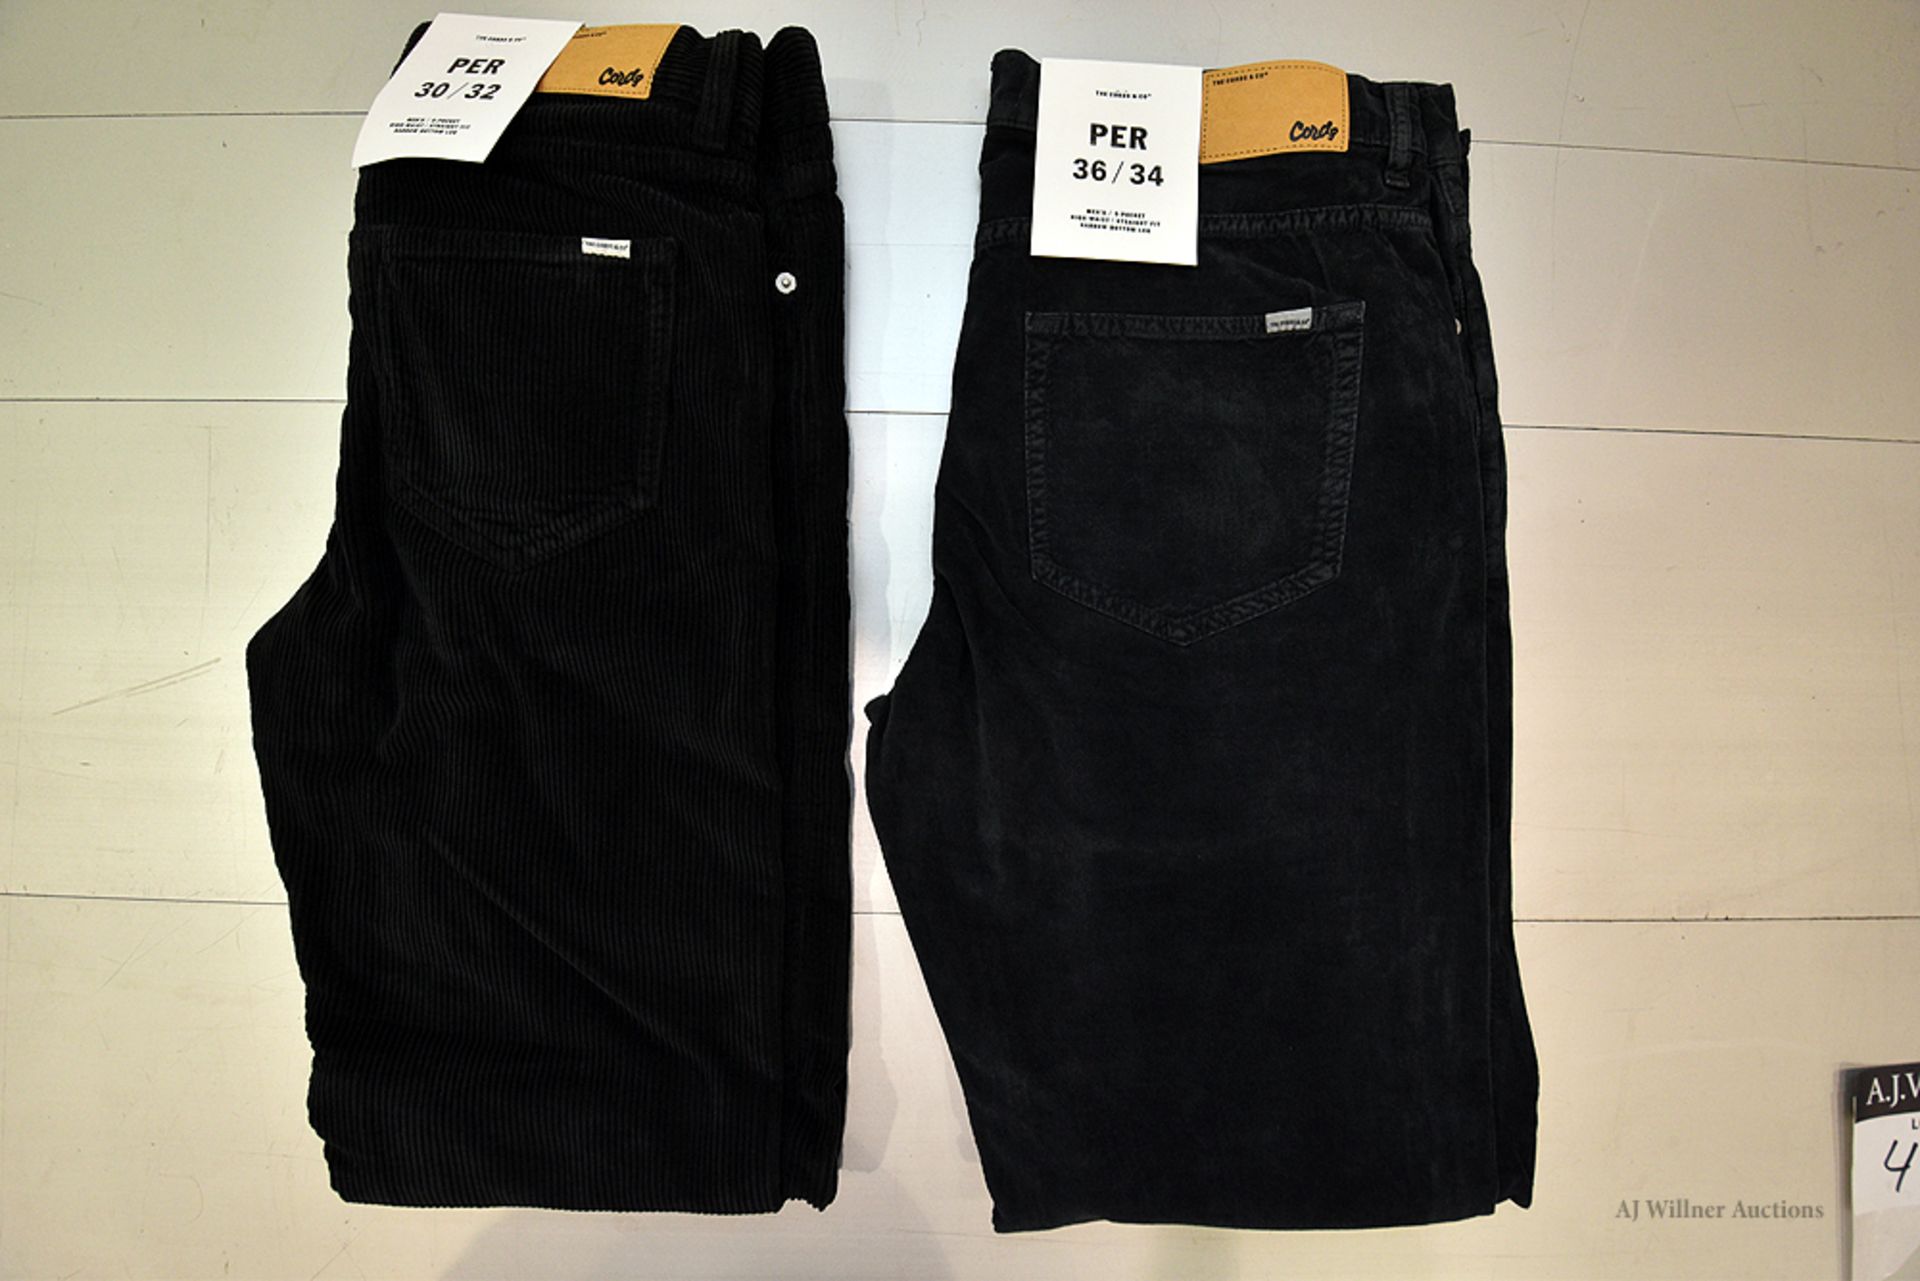 THE CORDS & CO. "PER" MEN'S/HIGH-WAIST/ STRAIGHT FIT/ NARROW LEG MSRP $160